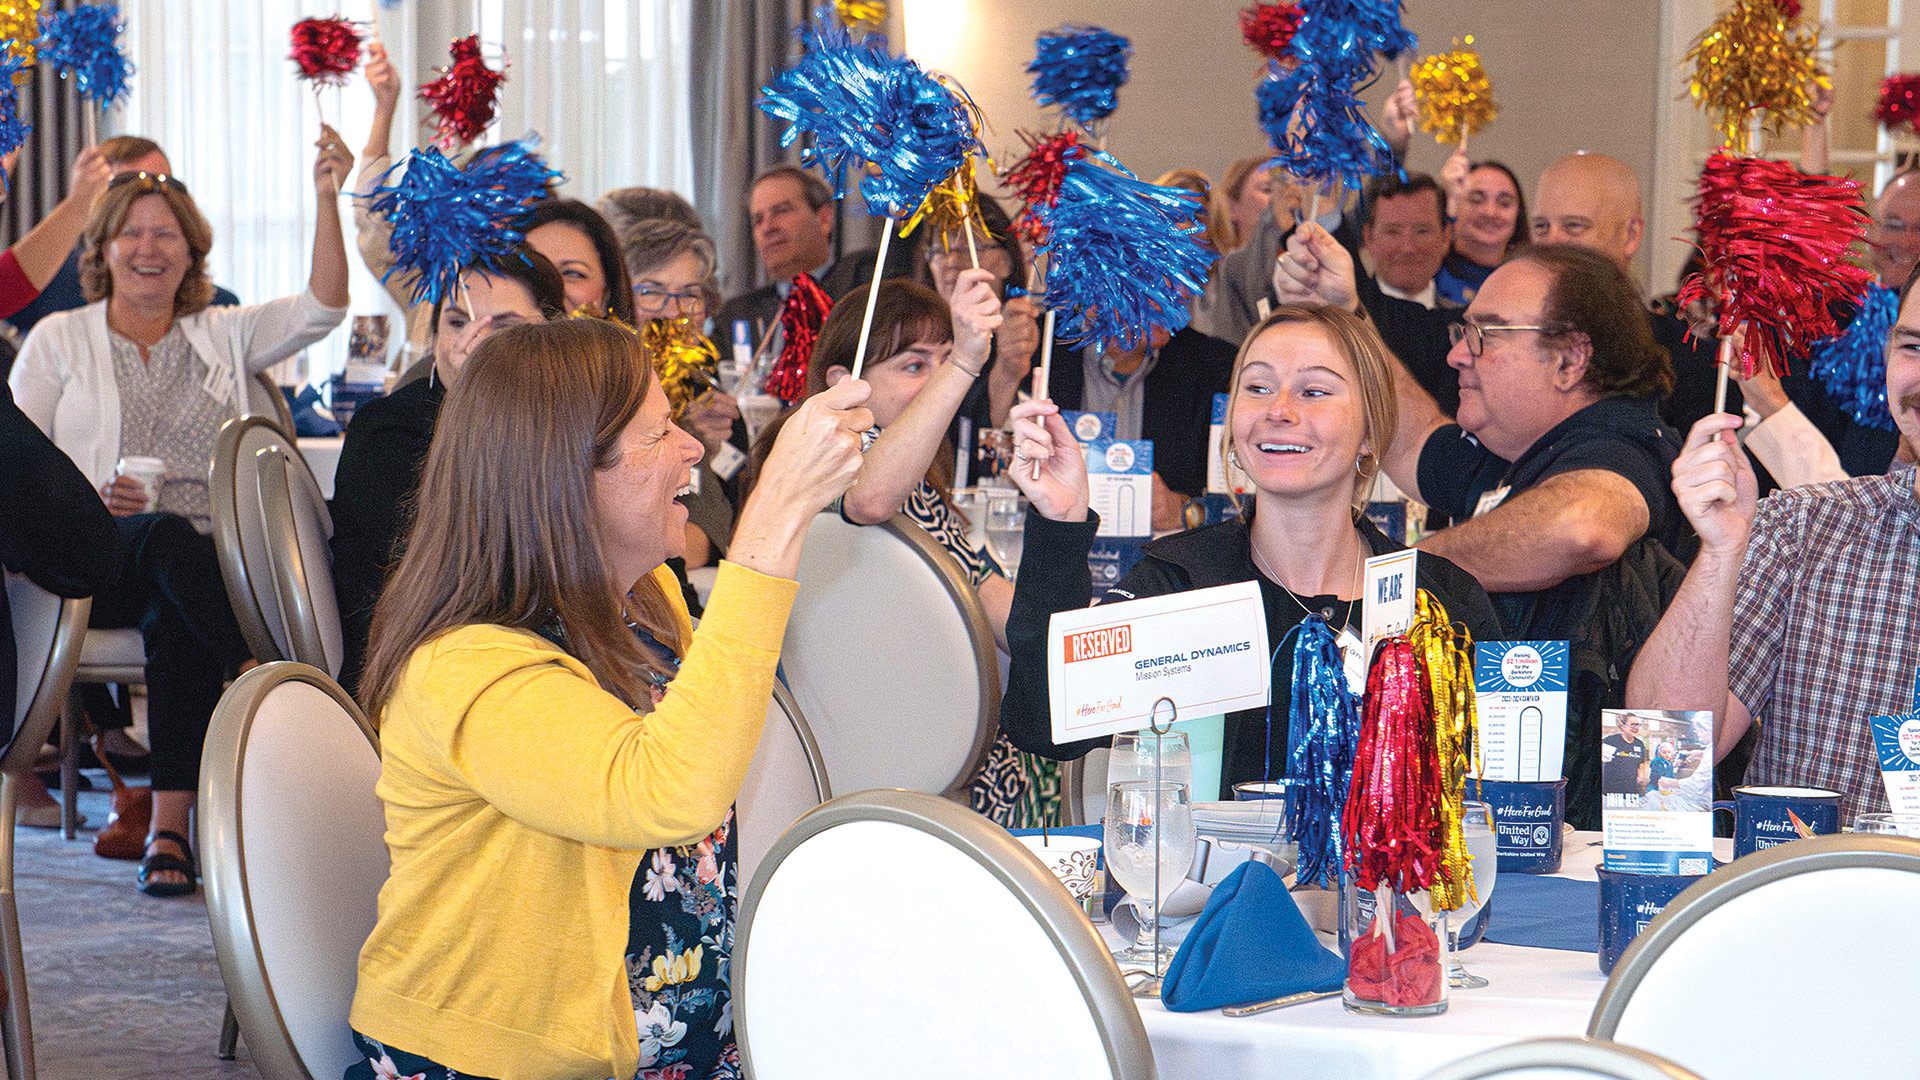 attendees wave pom-poms during a celebratory moment. (Photo by Autumn Phoenix Photography)